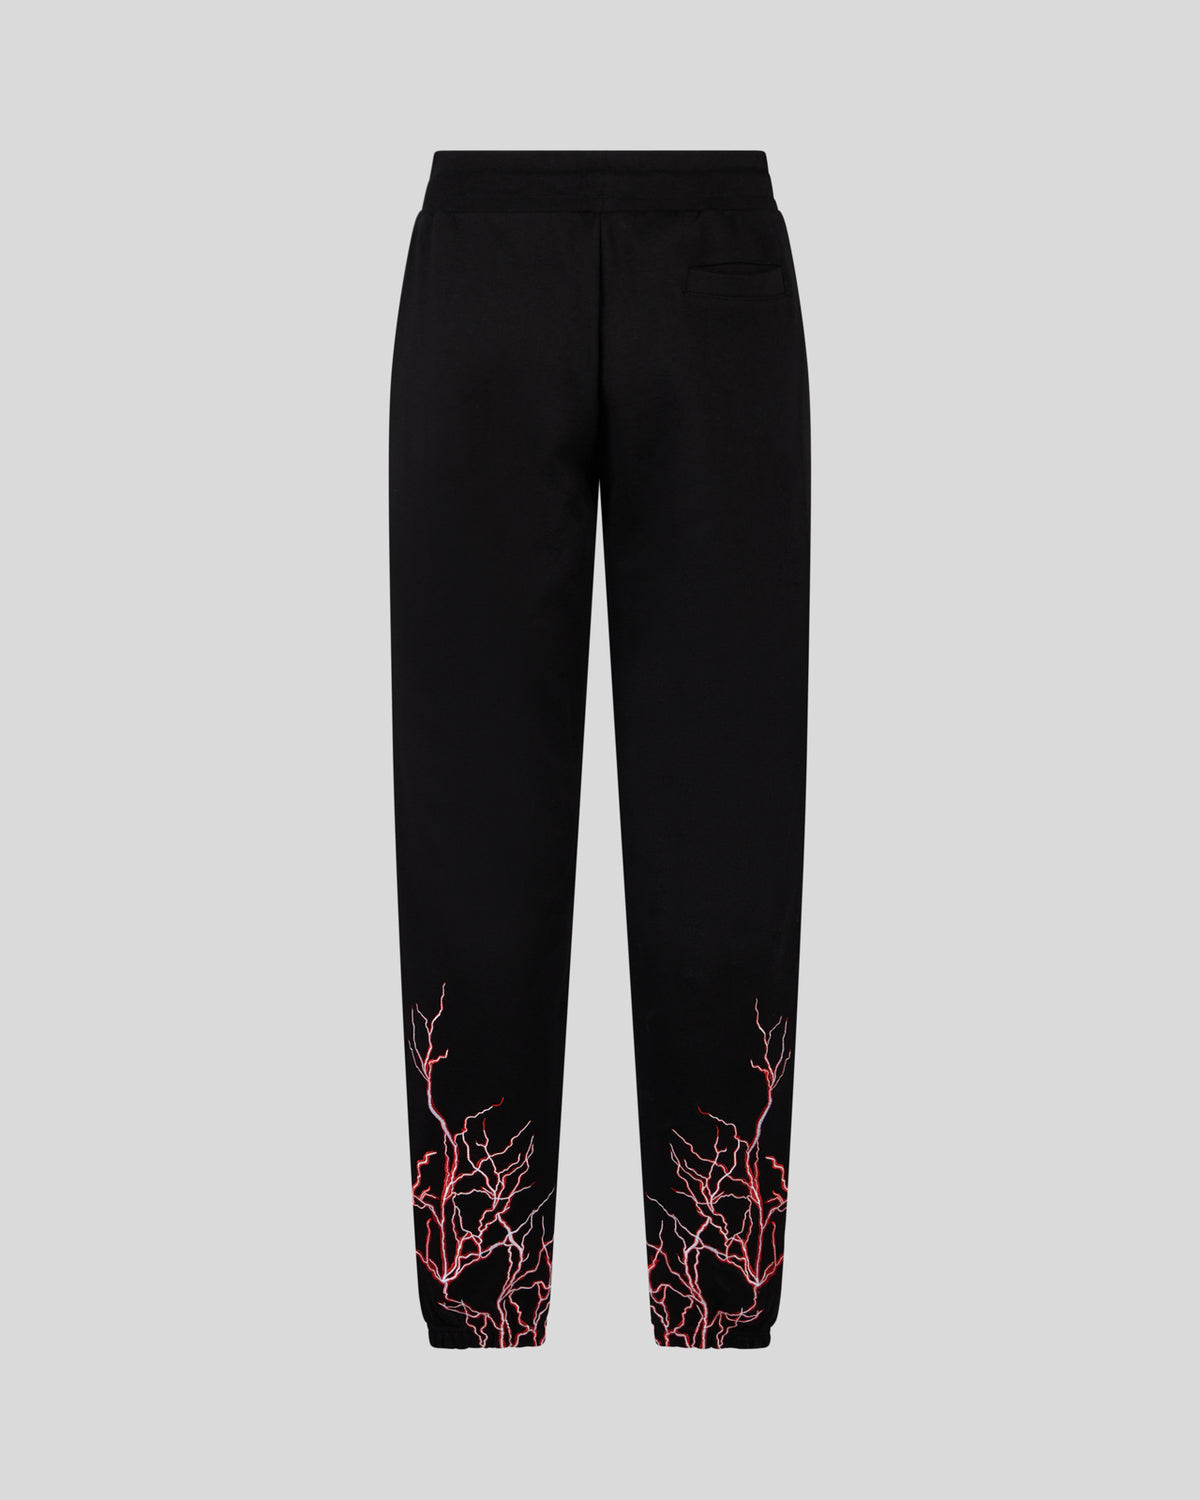 PHOBIA BLACK PANT WITH RED EMBROIDERY LIGHTNING